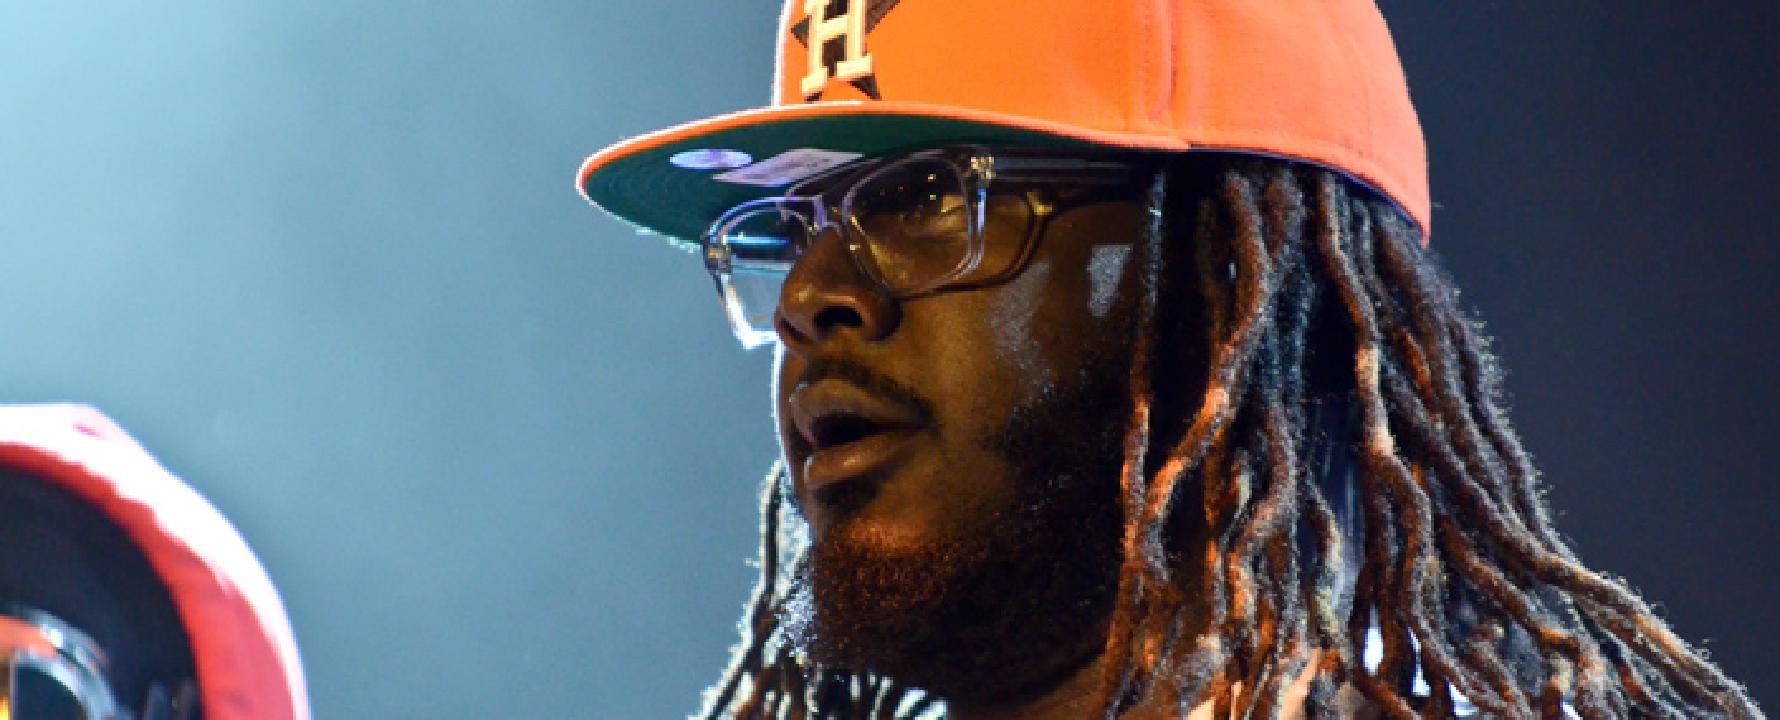 Promotional photograph of T-Pain.